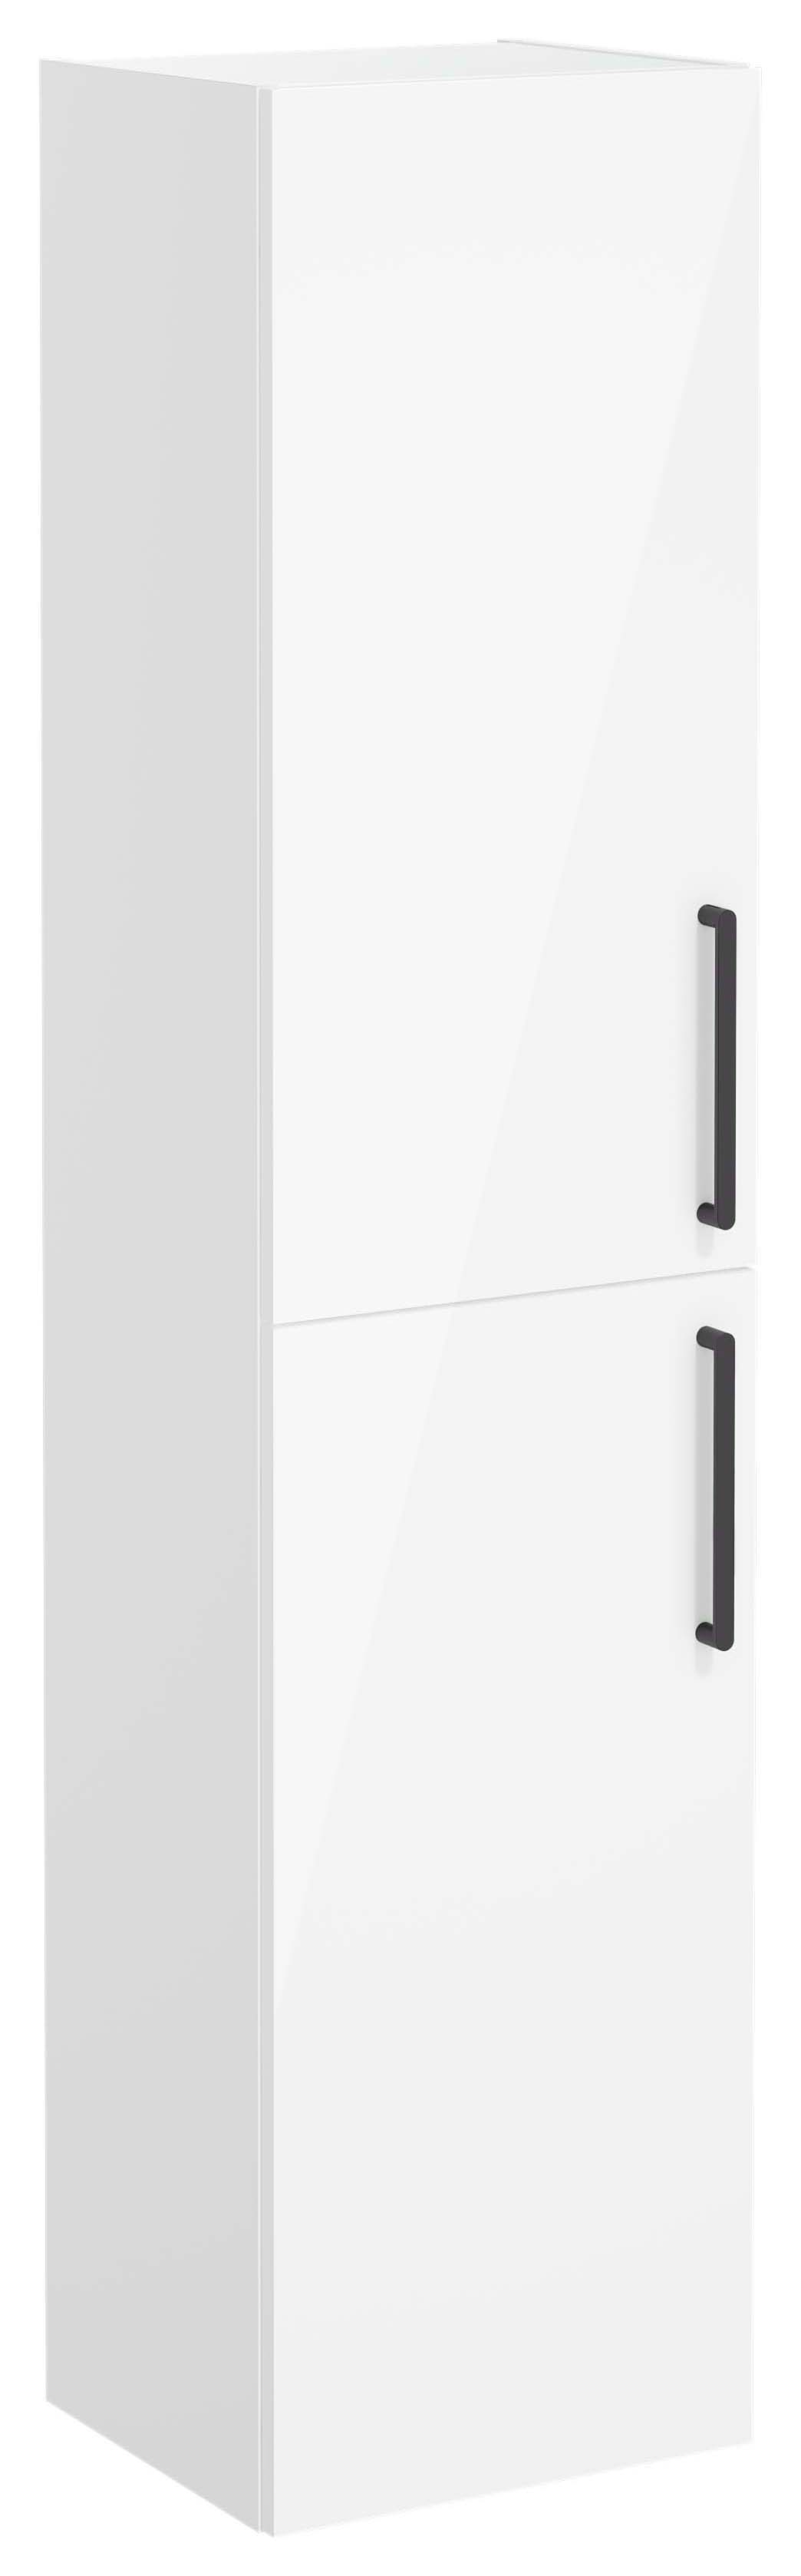 Image of VitrA Root Gloss White Tower Unit - 1800 x 420mm